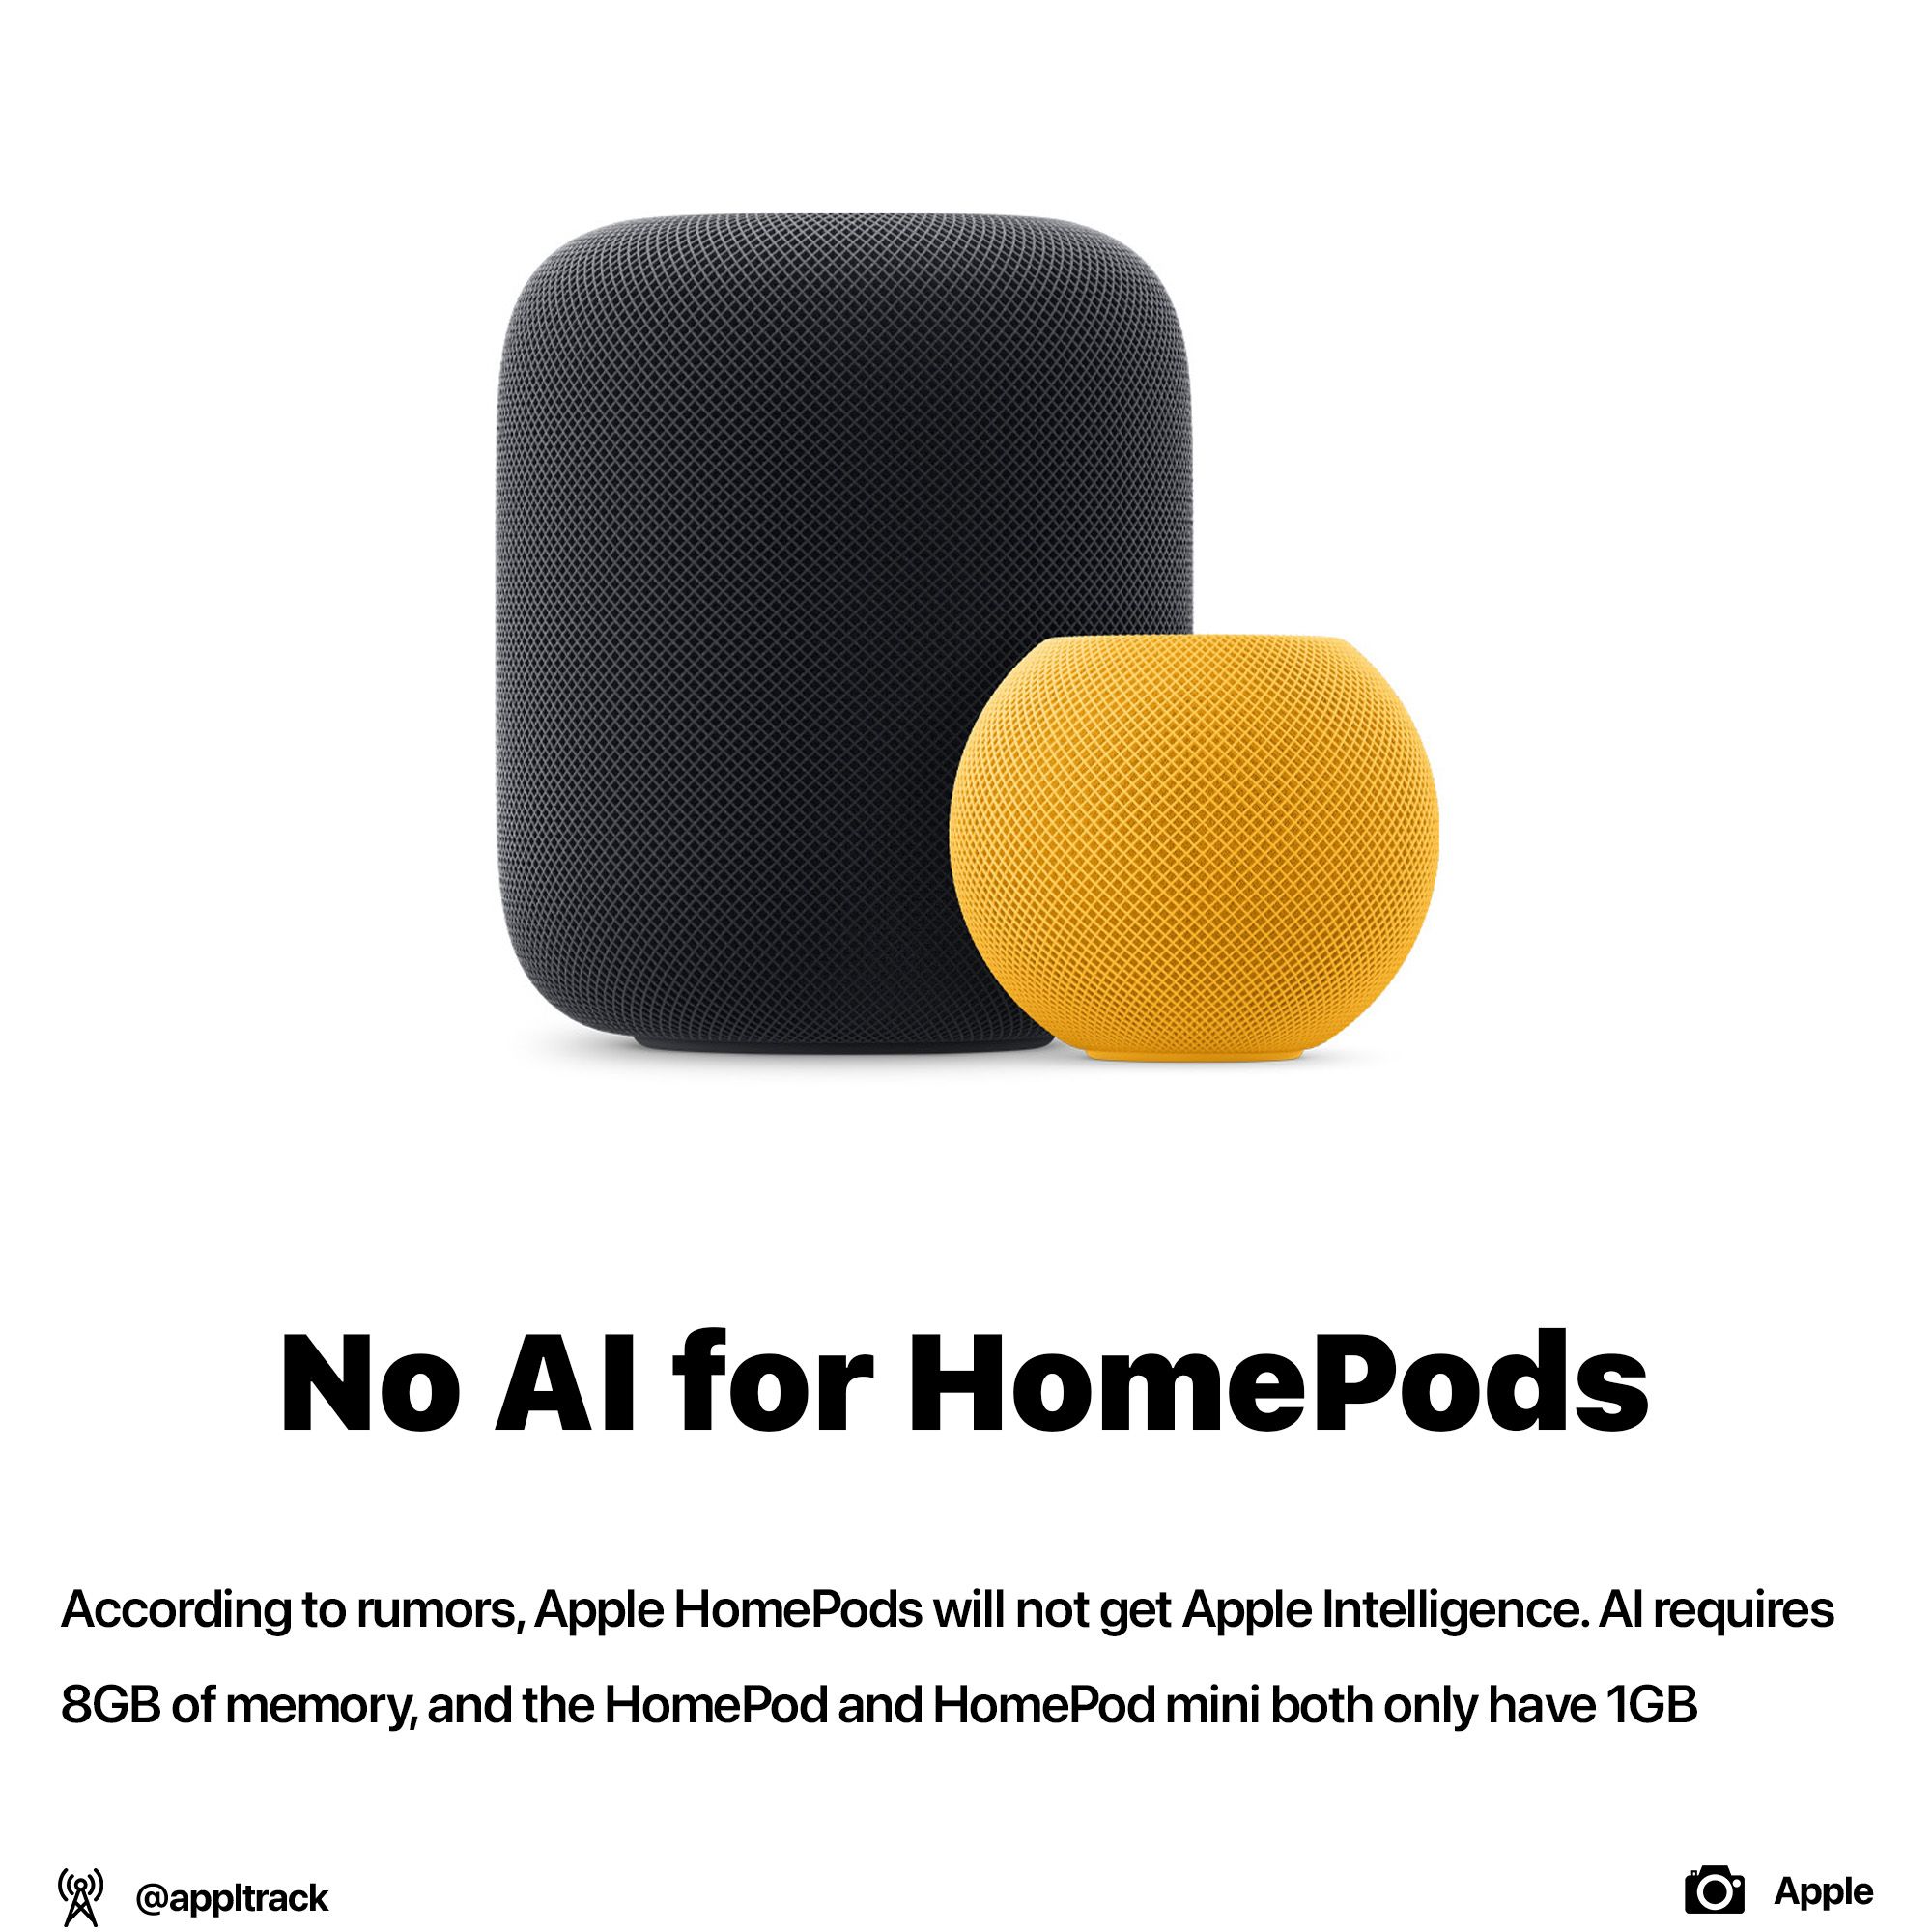 Apple Intelligence is not coming to HomePods